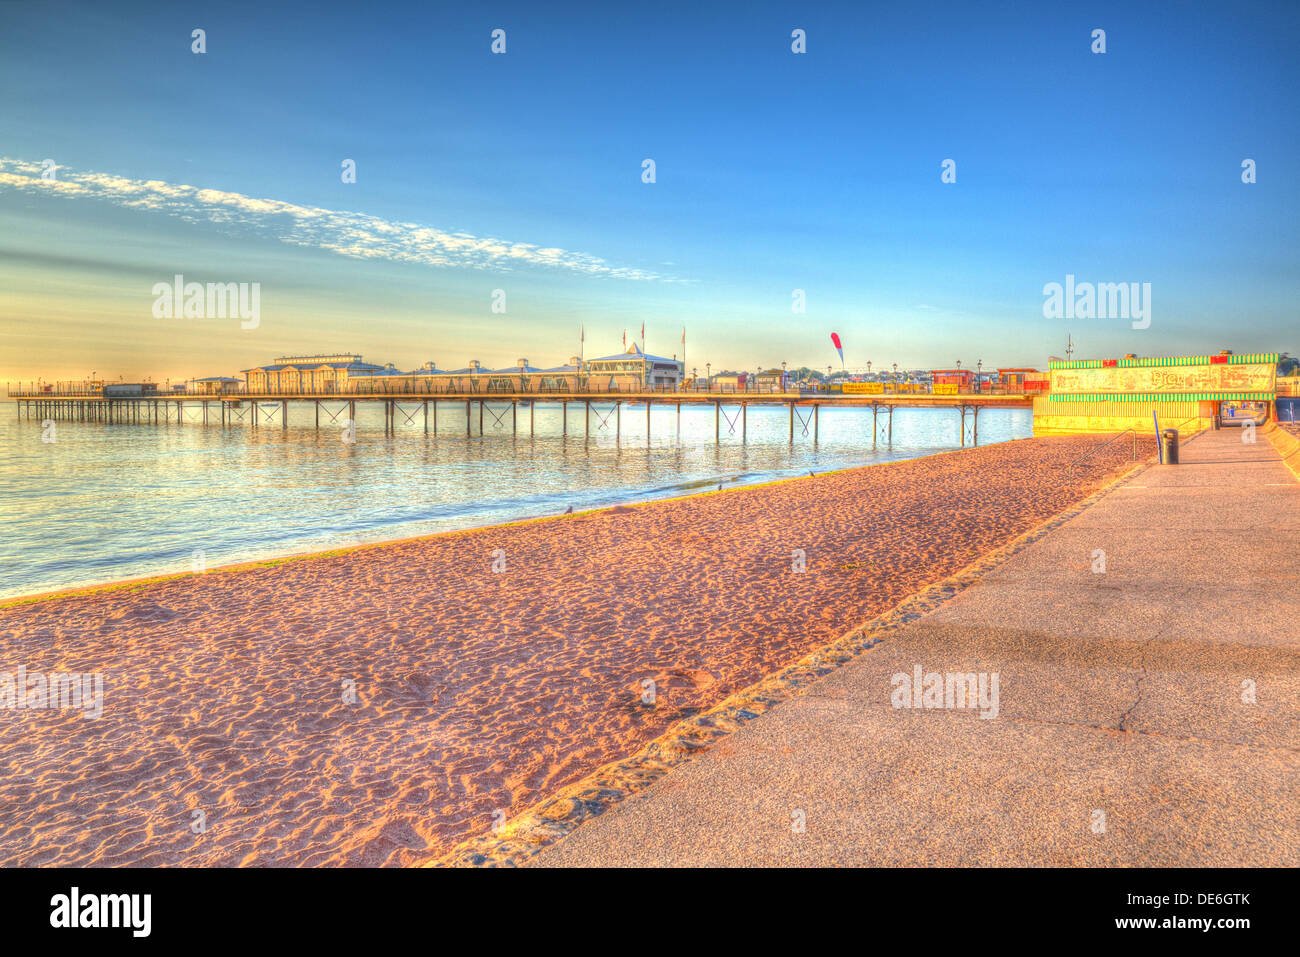 Paignton pier and sandy beach Torbay Devon England in HDR with blue sky, near tourist destinations of Torquay and Brixham Stock Photo